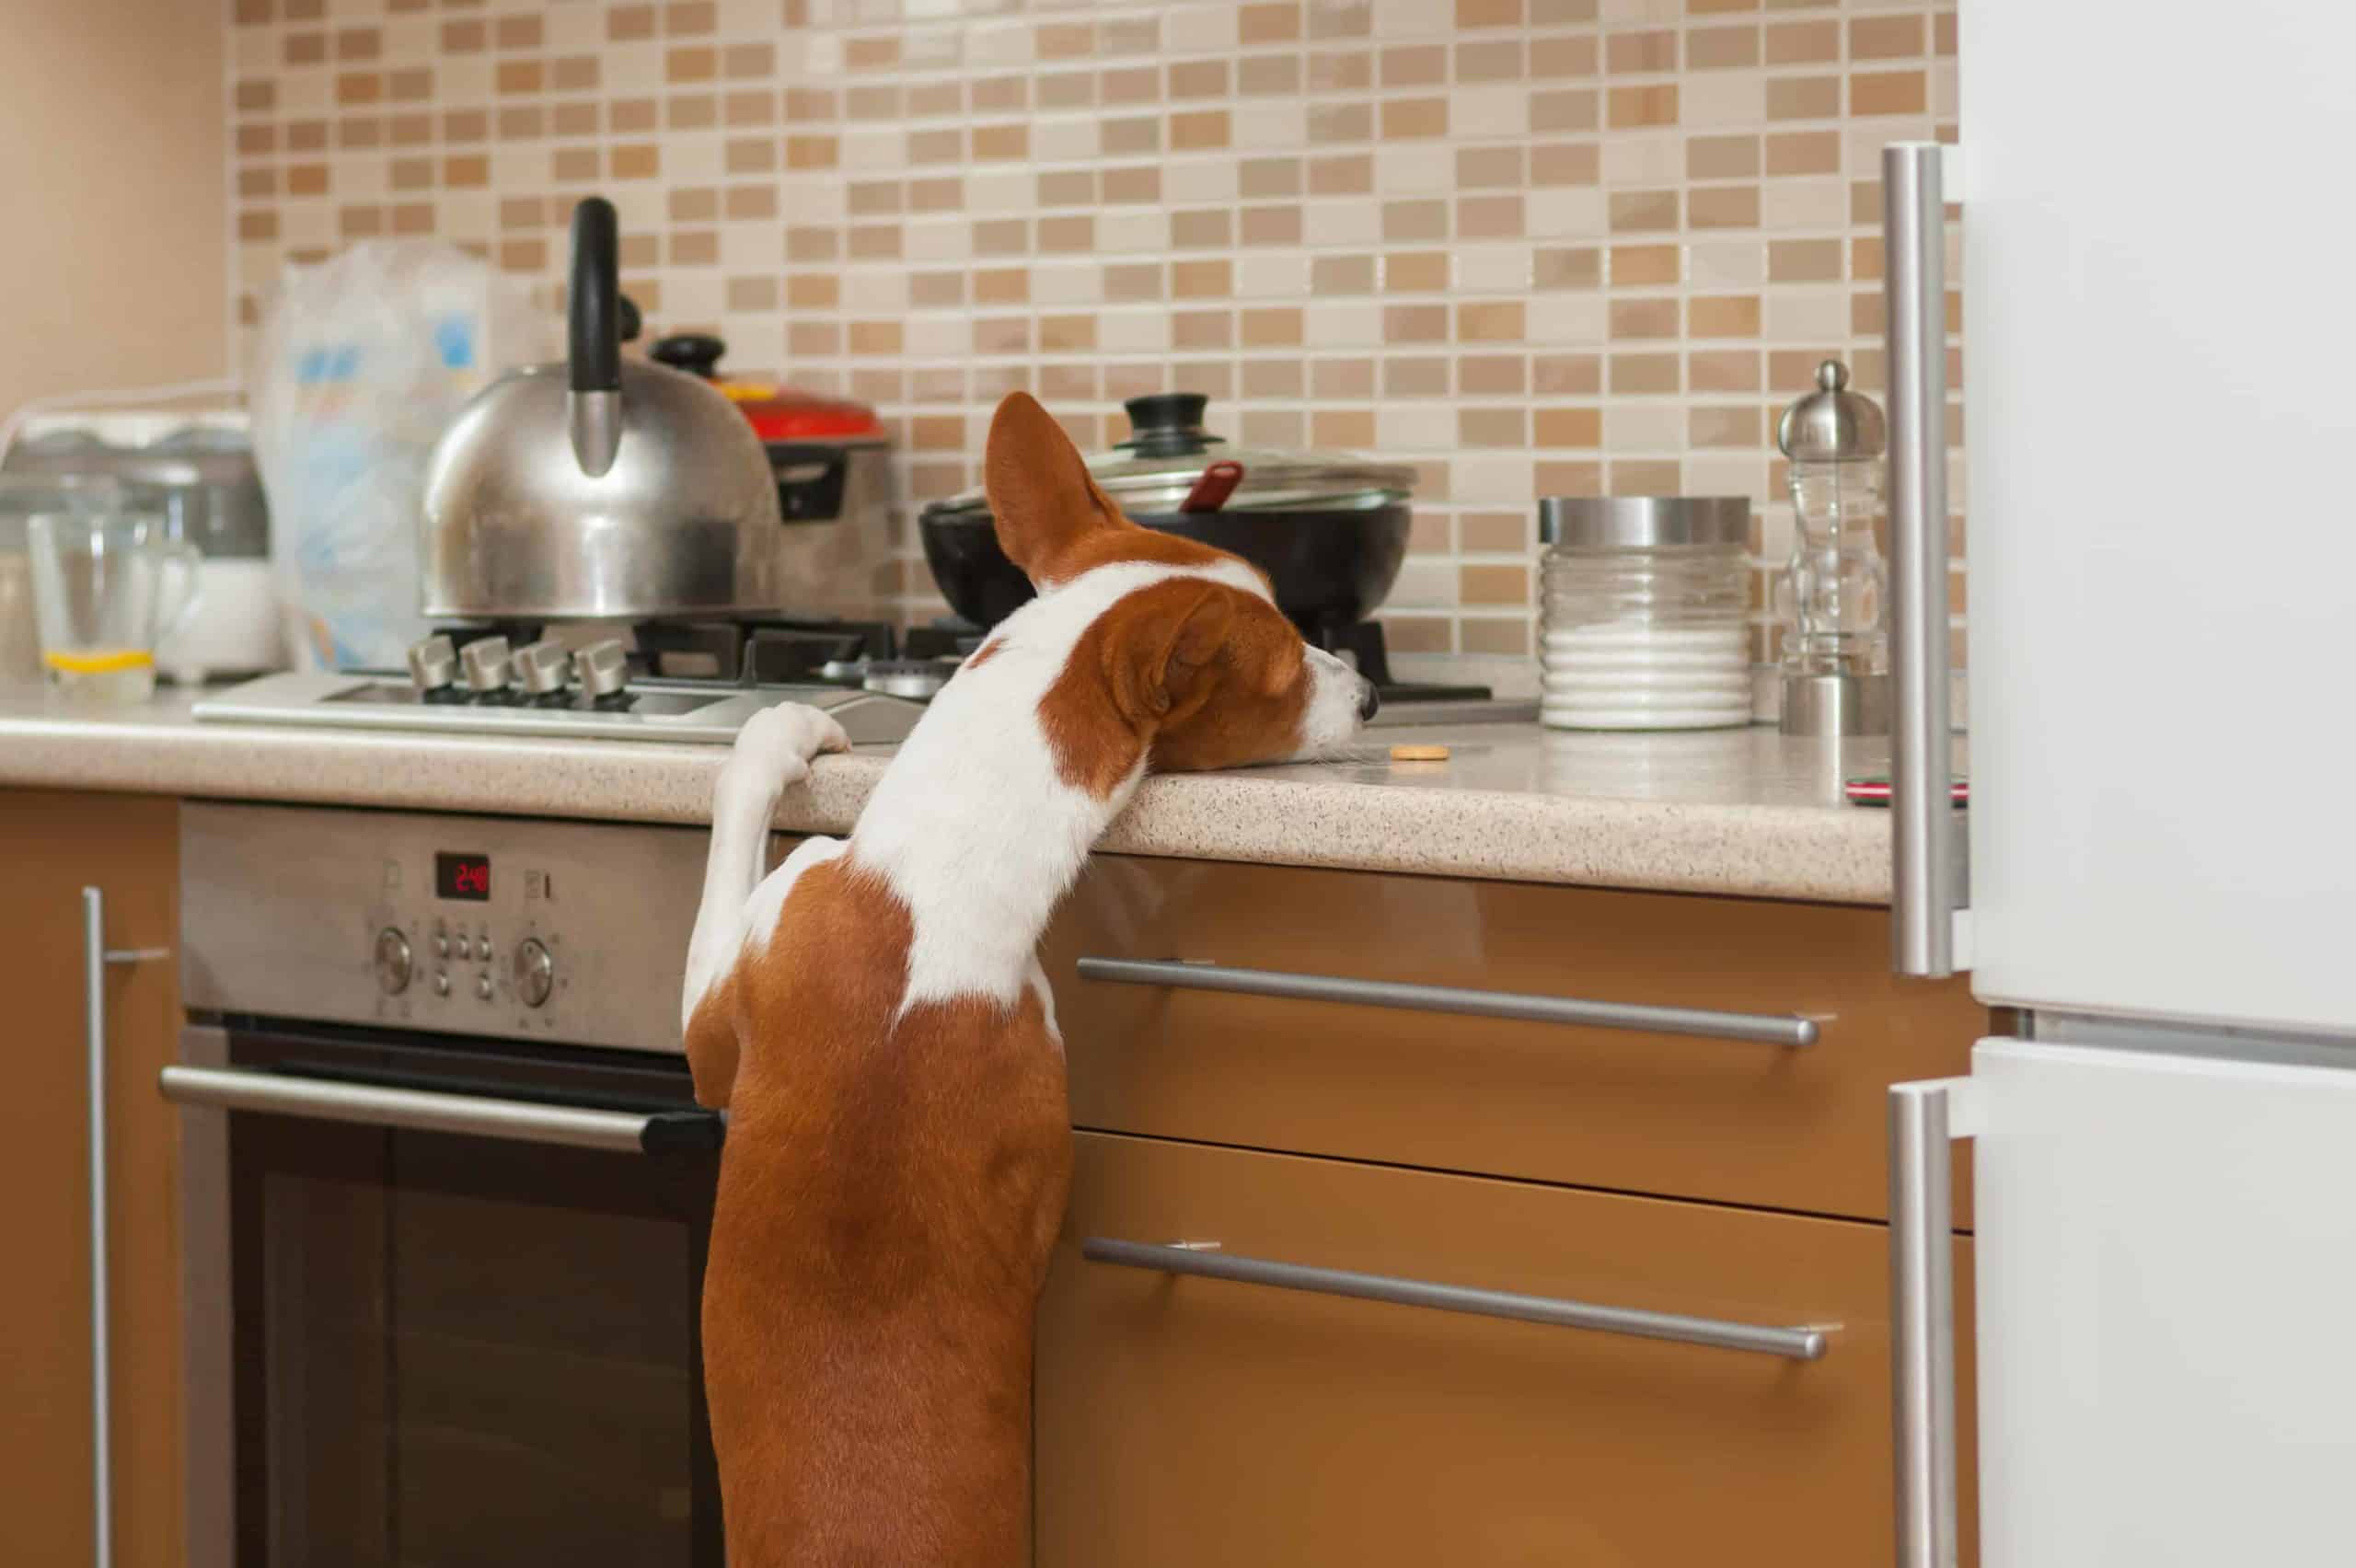 Basenji tries to steal food from kitchen counter. Keep an eye on your dog in the kitchen to make sure he doesn't eat anything dangerous.